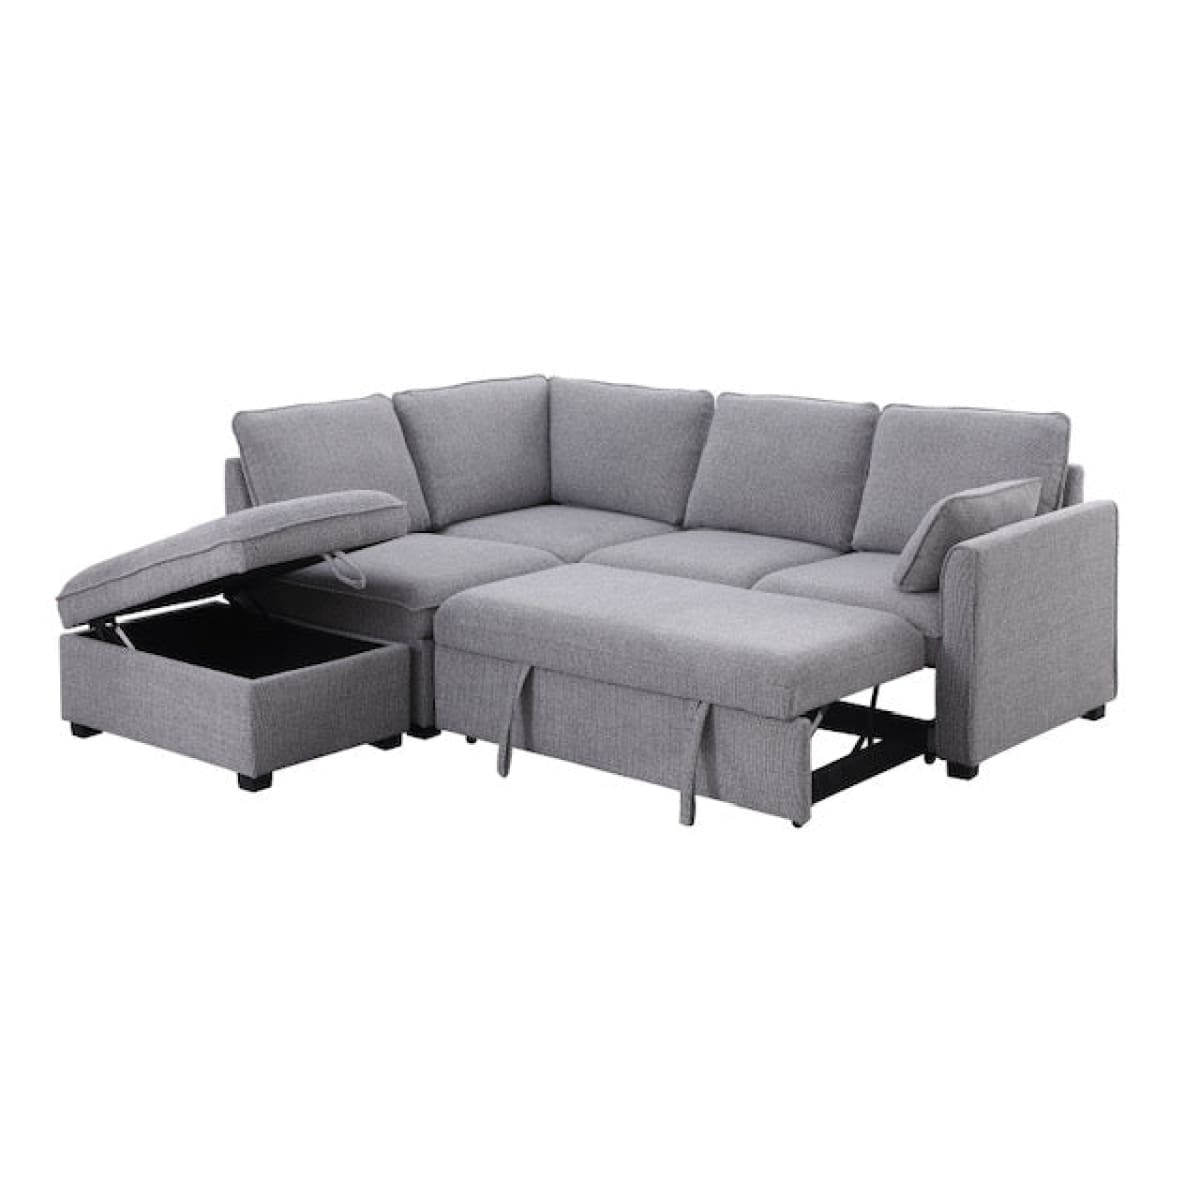 Delray Sleeper Sectional w/Storage - Sofabed